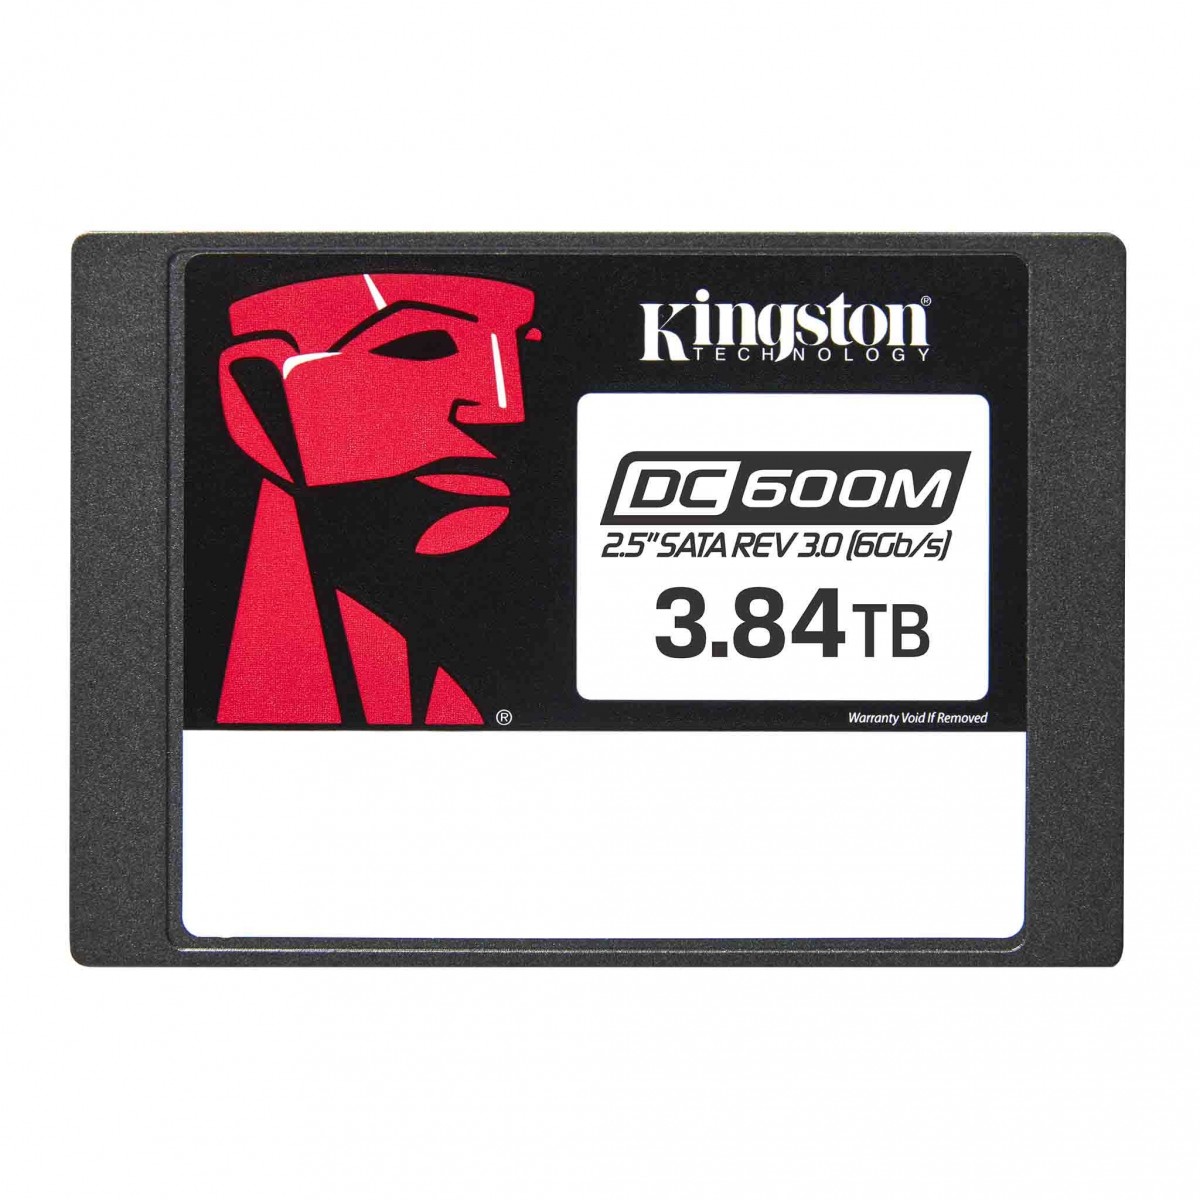 Kingston 3.84TB DC600M 2.5inch SATA3 SSD - Solid State Disk - 2.5